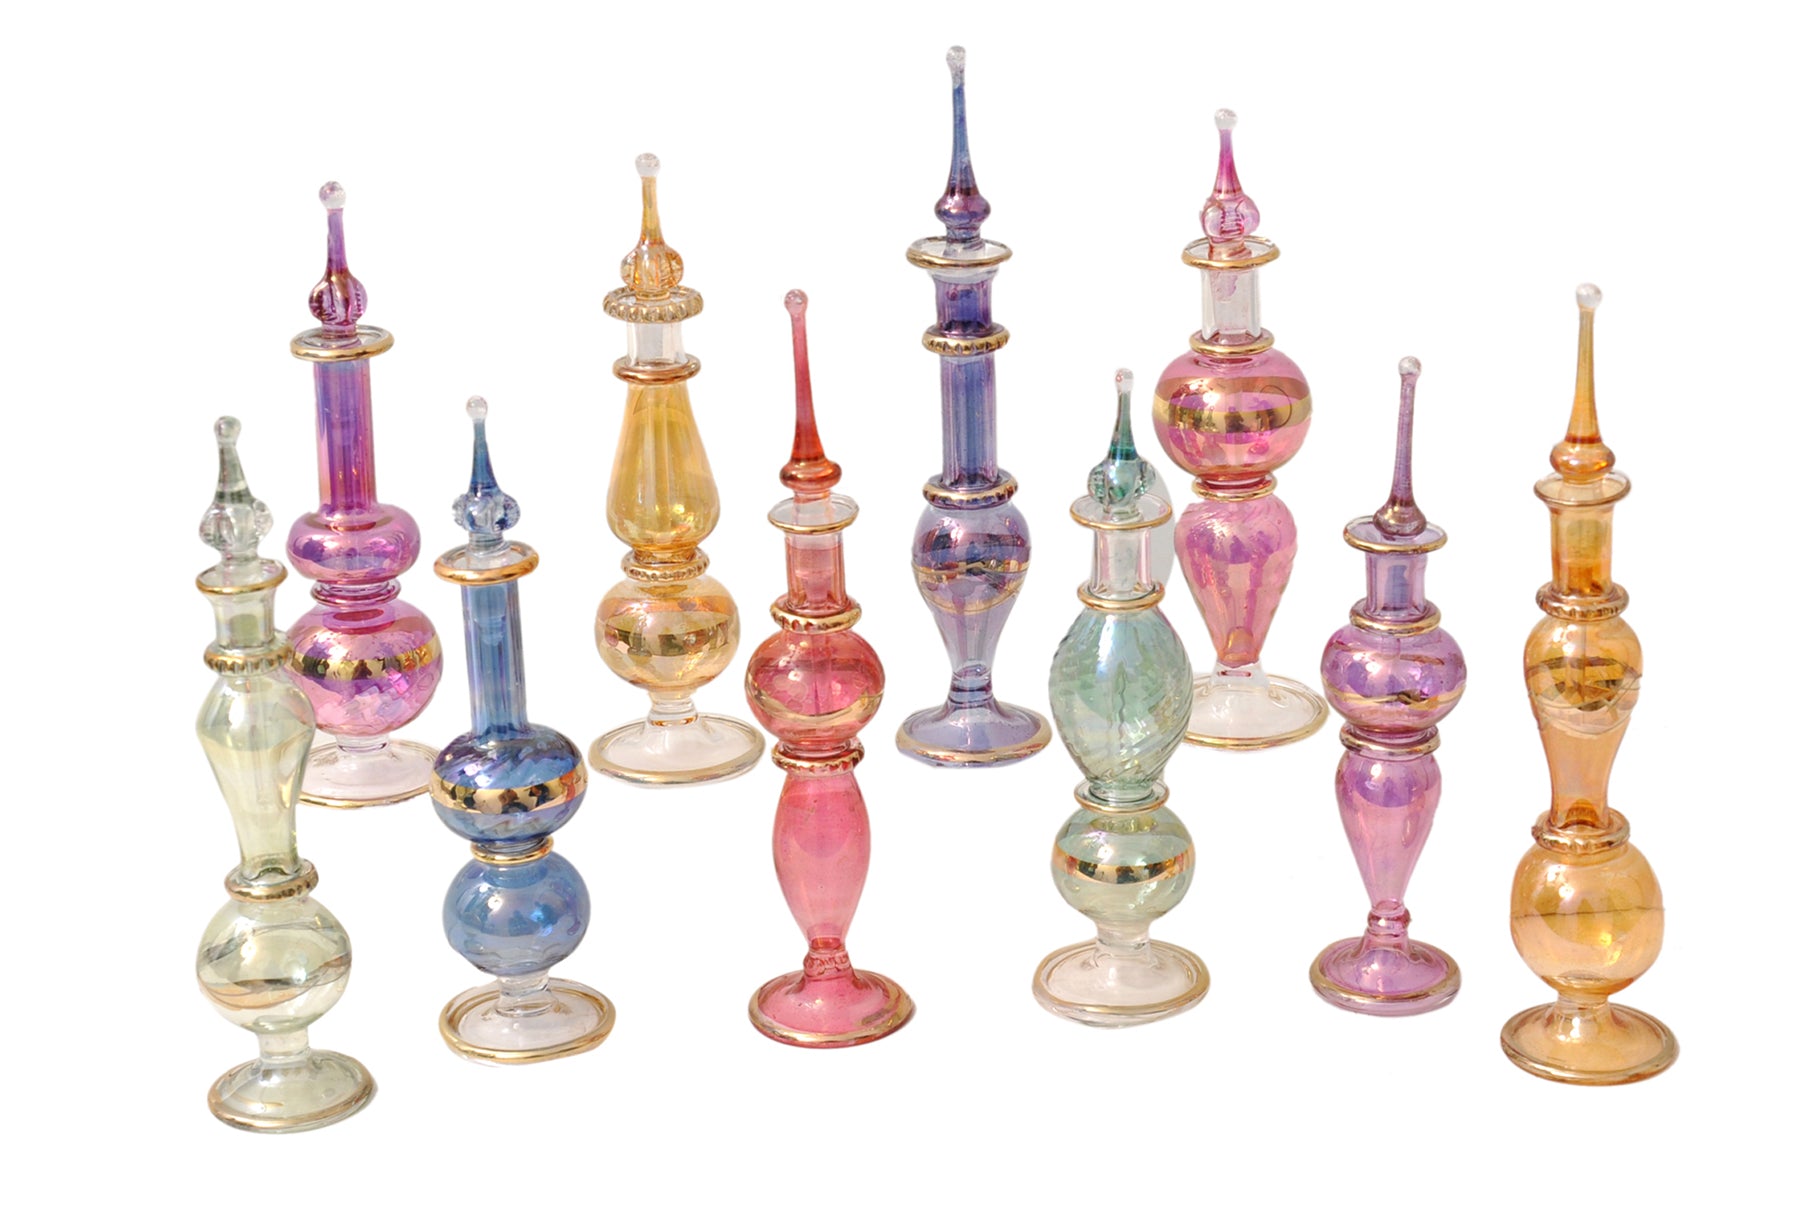 Genie Blown Glass Miniature Perfume Bottles for Perfumes & Essential Oils, Decorative Vials 4in High (12cm), Assorted Colors